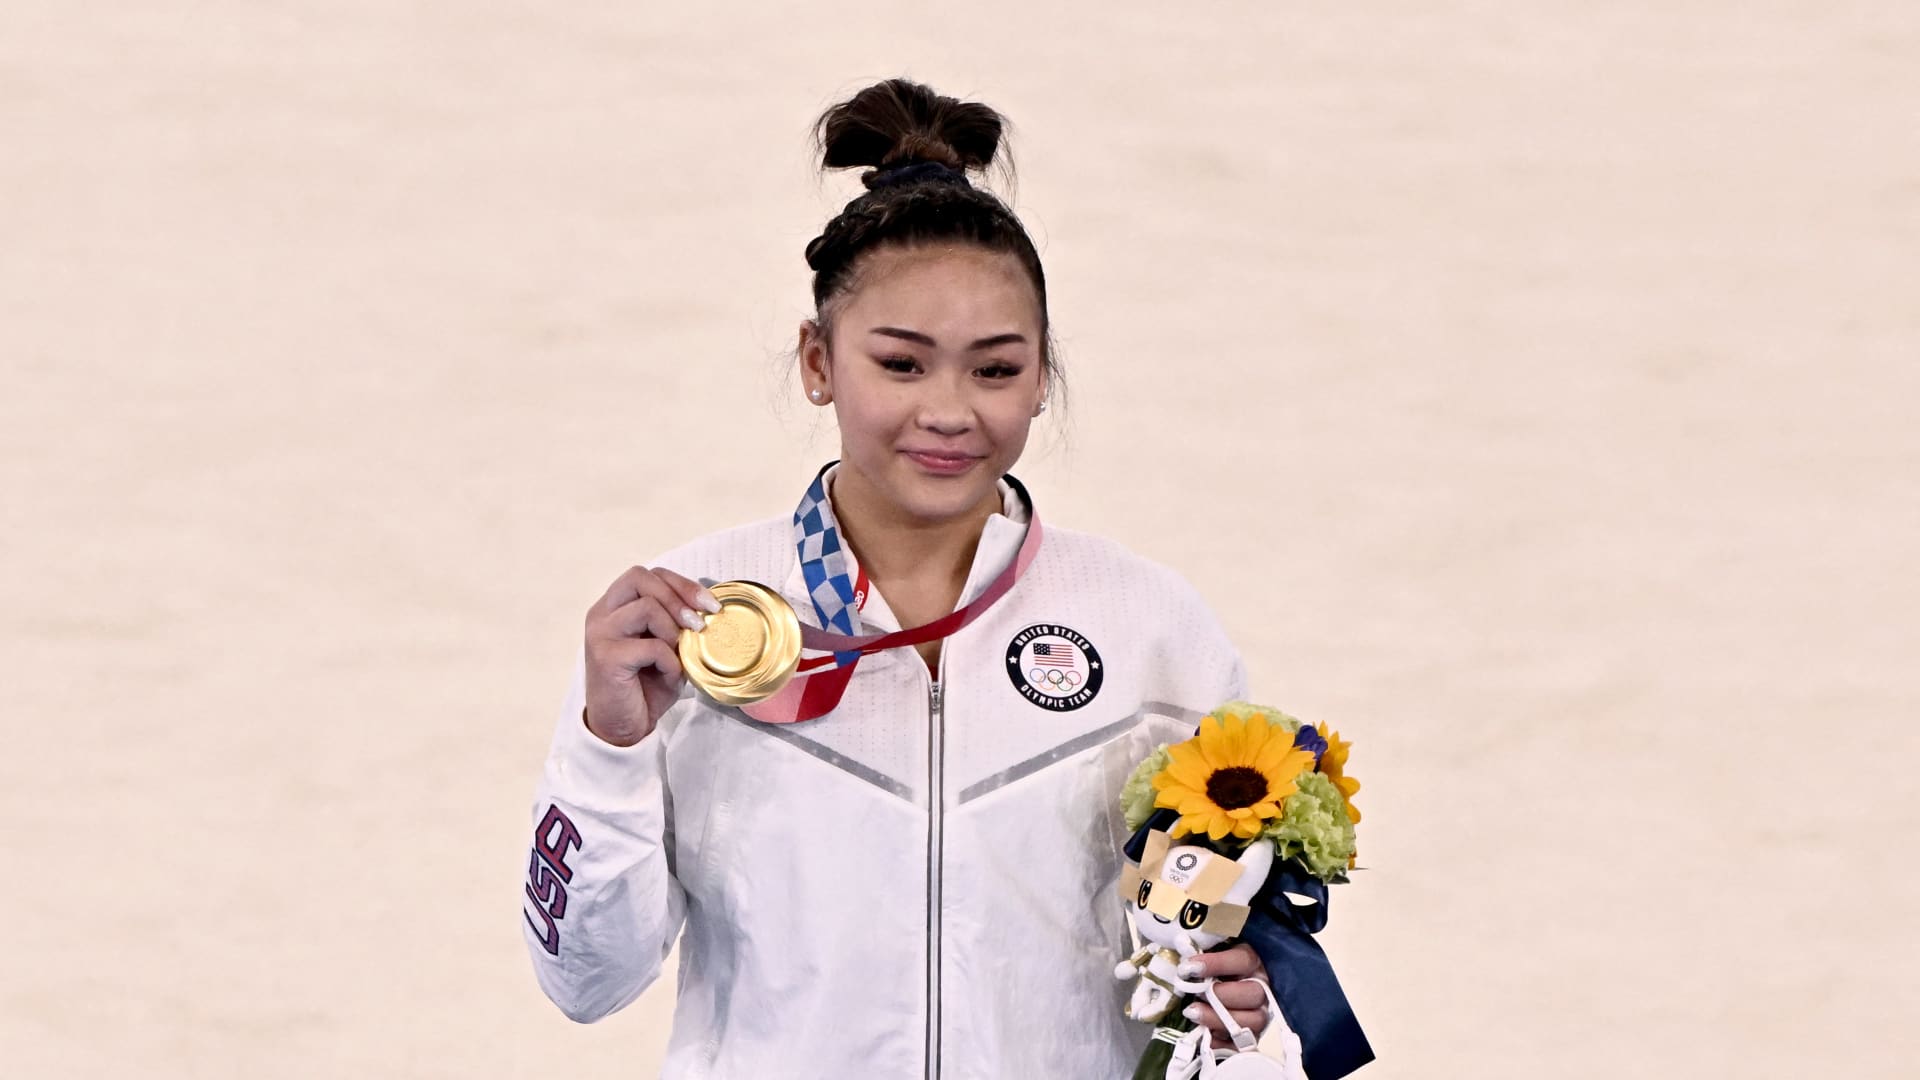 USA's Sunisa Lee (gold) celebrate son the podium during the medal ceremony of the artistic gymnastics women's all-around final during the Tokyo 2020 Olympic Games at the Ariake Gymnastics Centre in Tokyo on July 29, 2021.